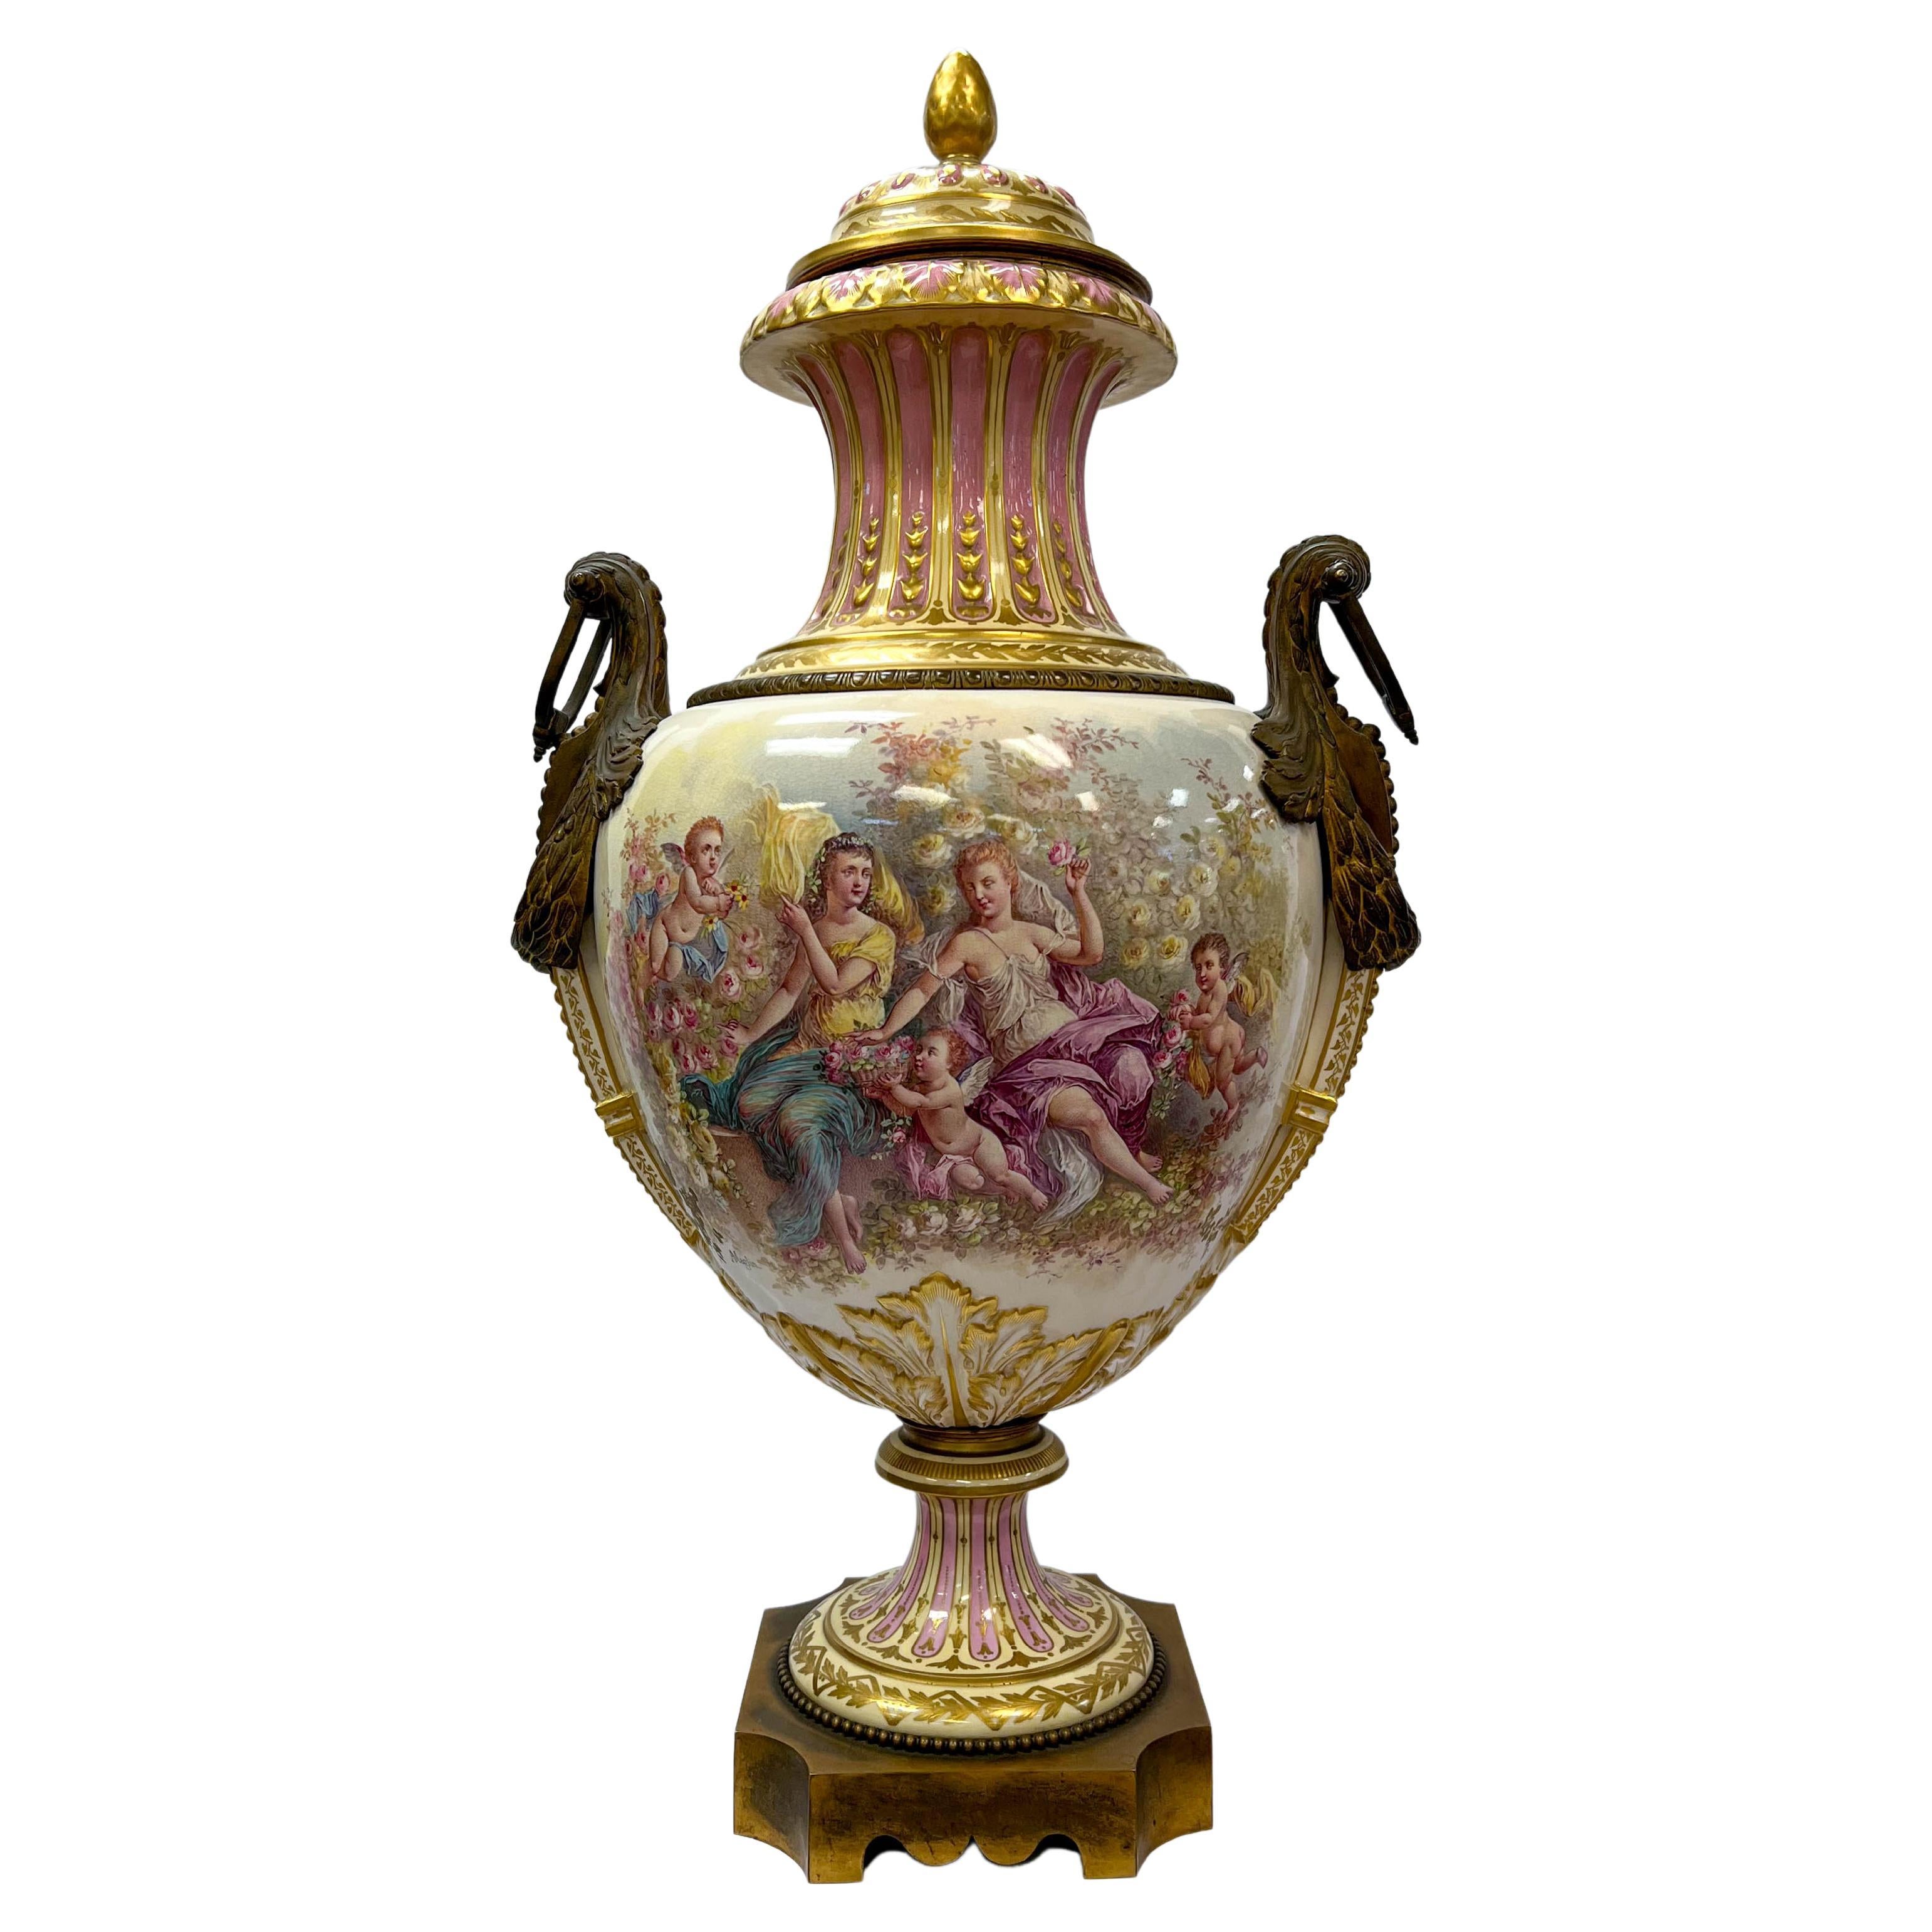 19th Century Large Scale Neoclassical Ormolu Sèvres Urn